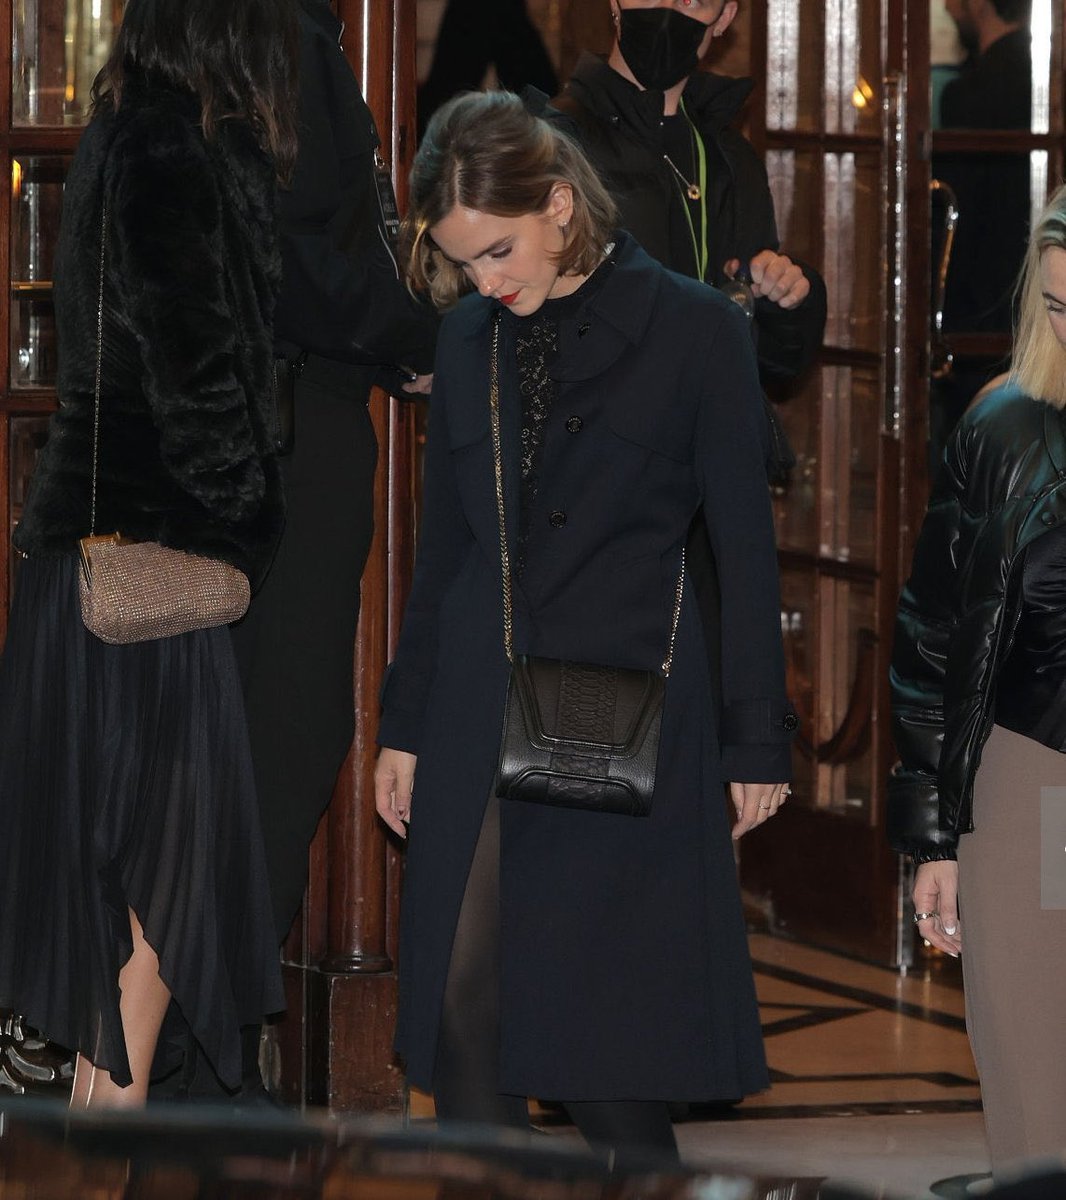 Emma Watson leaving the 'An audience with Adele' event in London